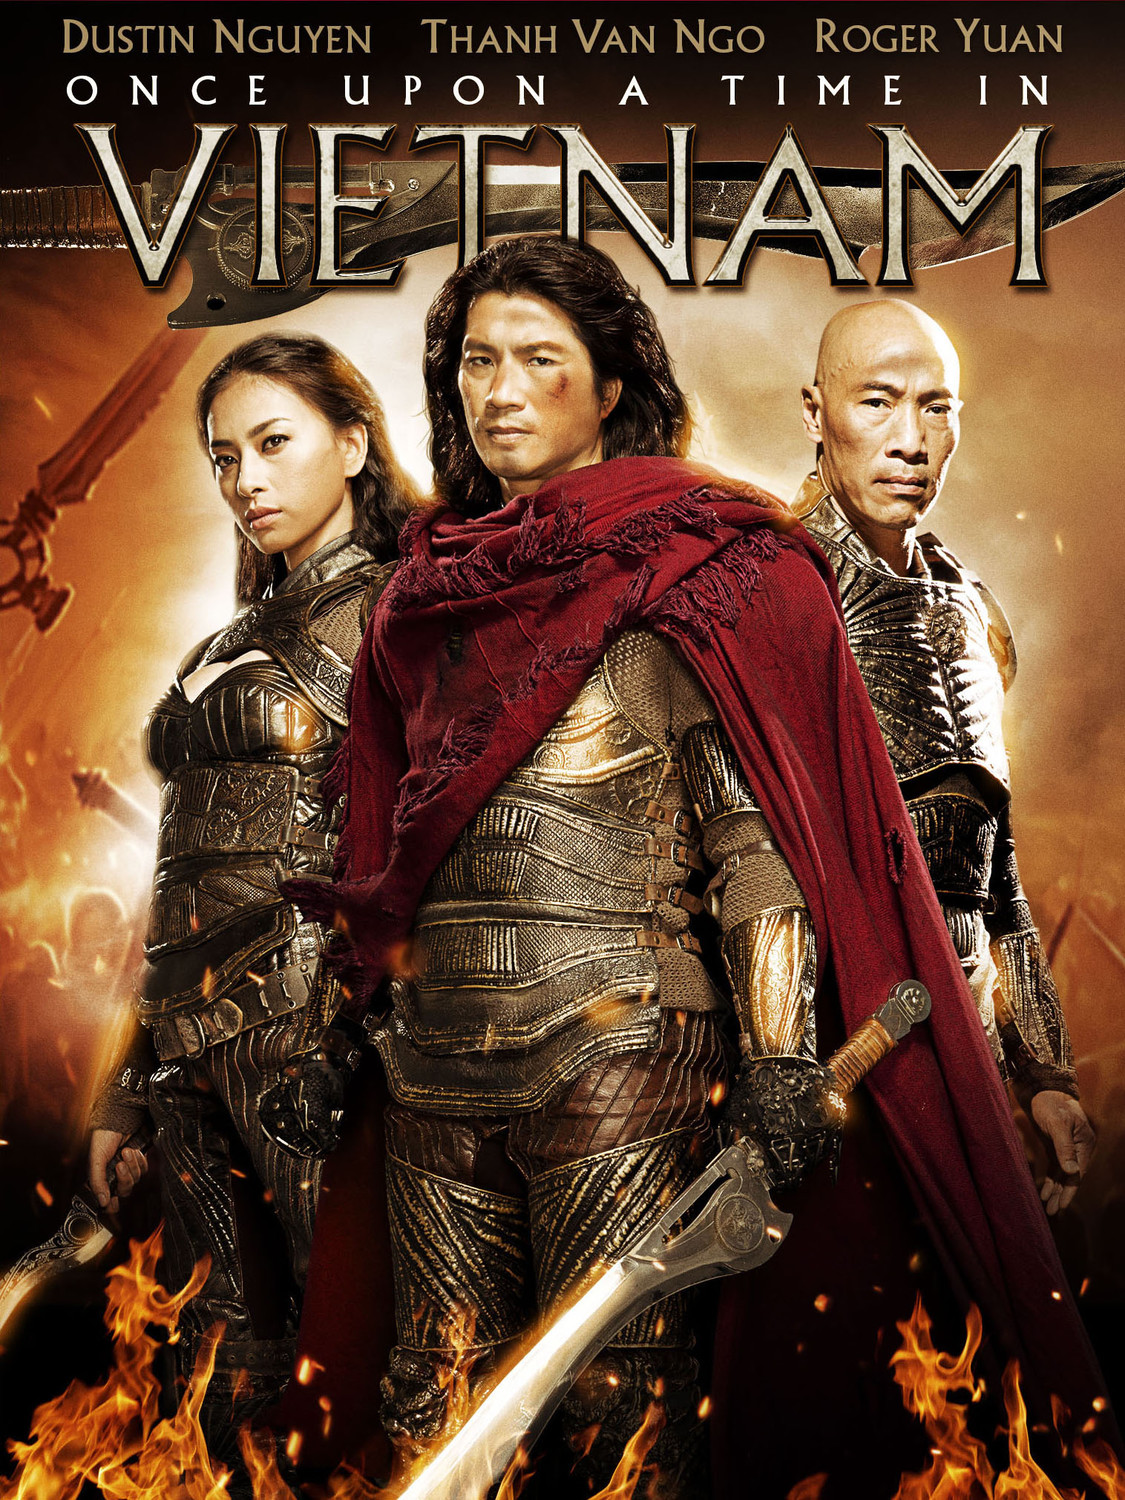 Lua Phat Aka Once Upon A Time In Vietnam (2013)